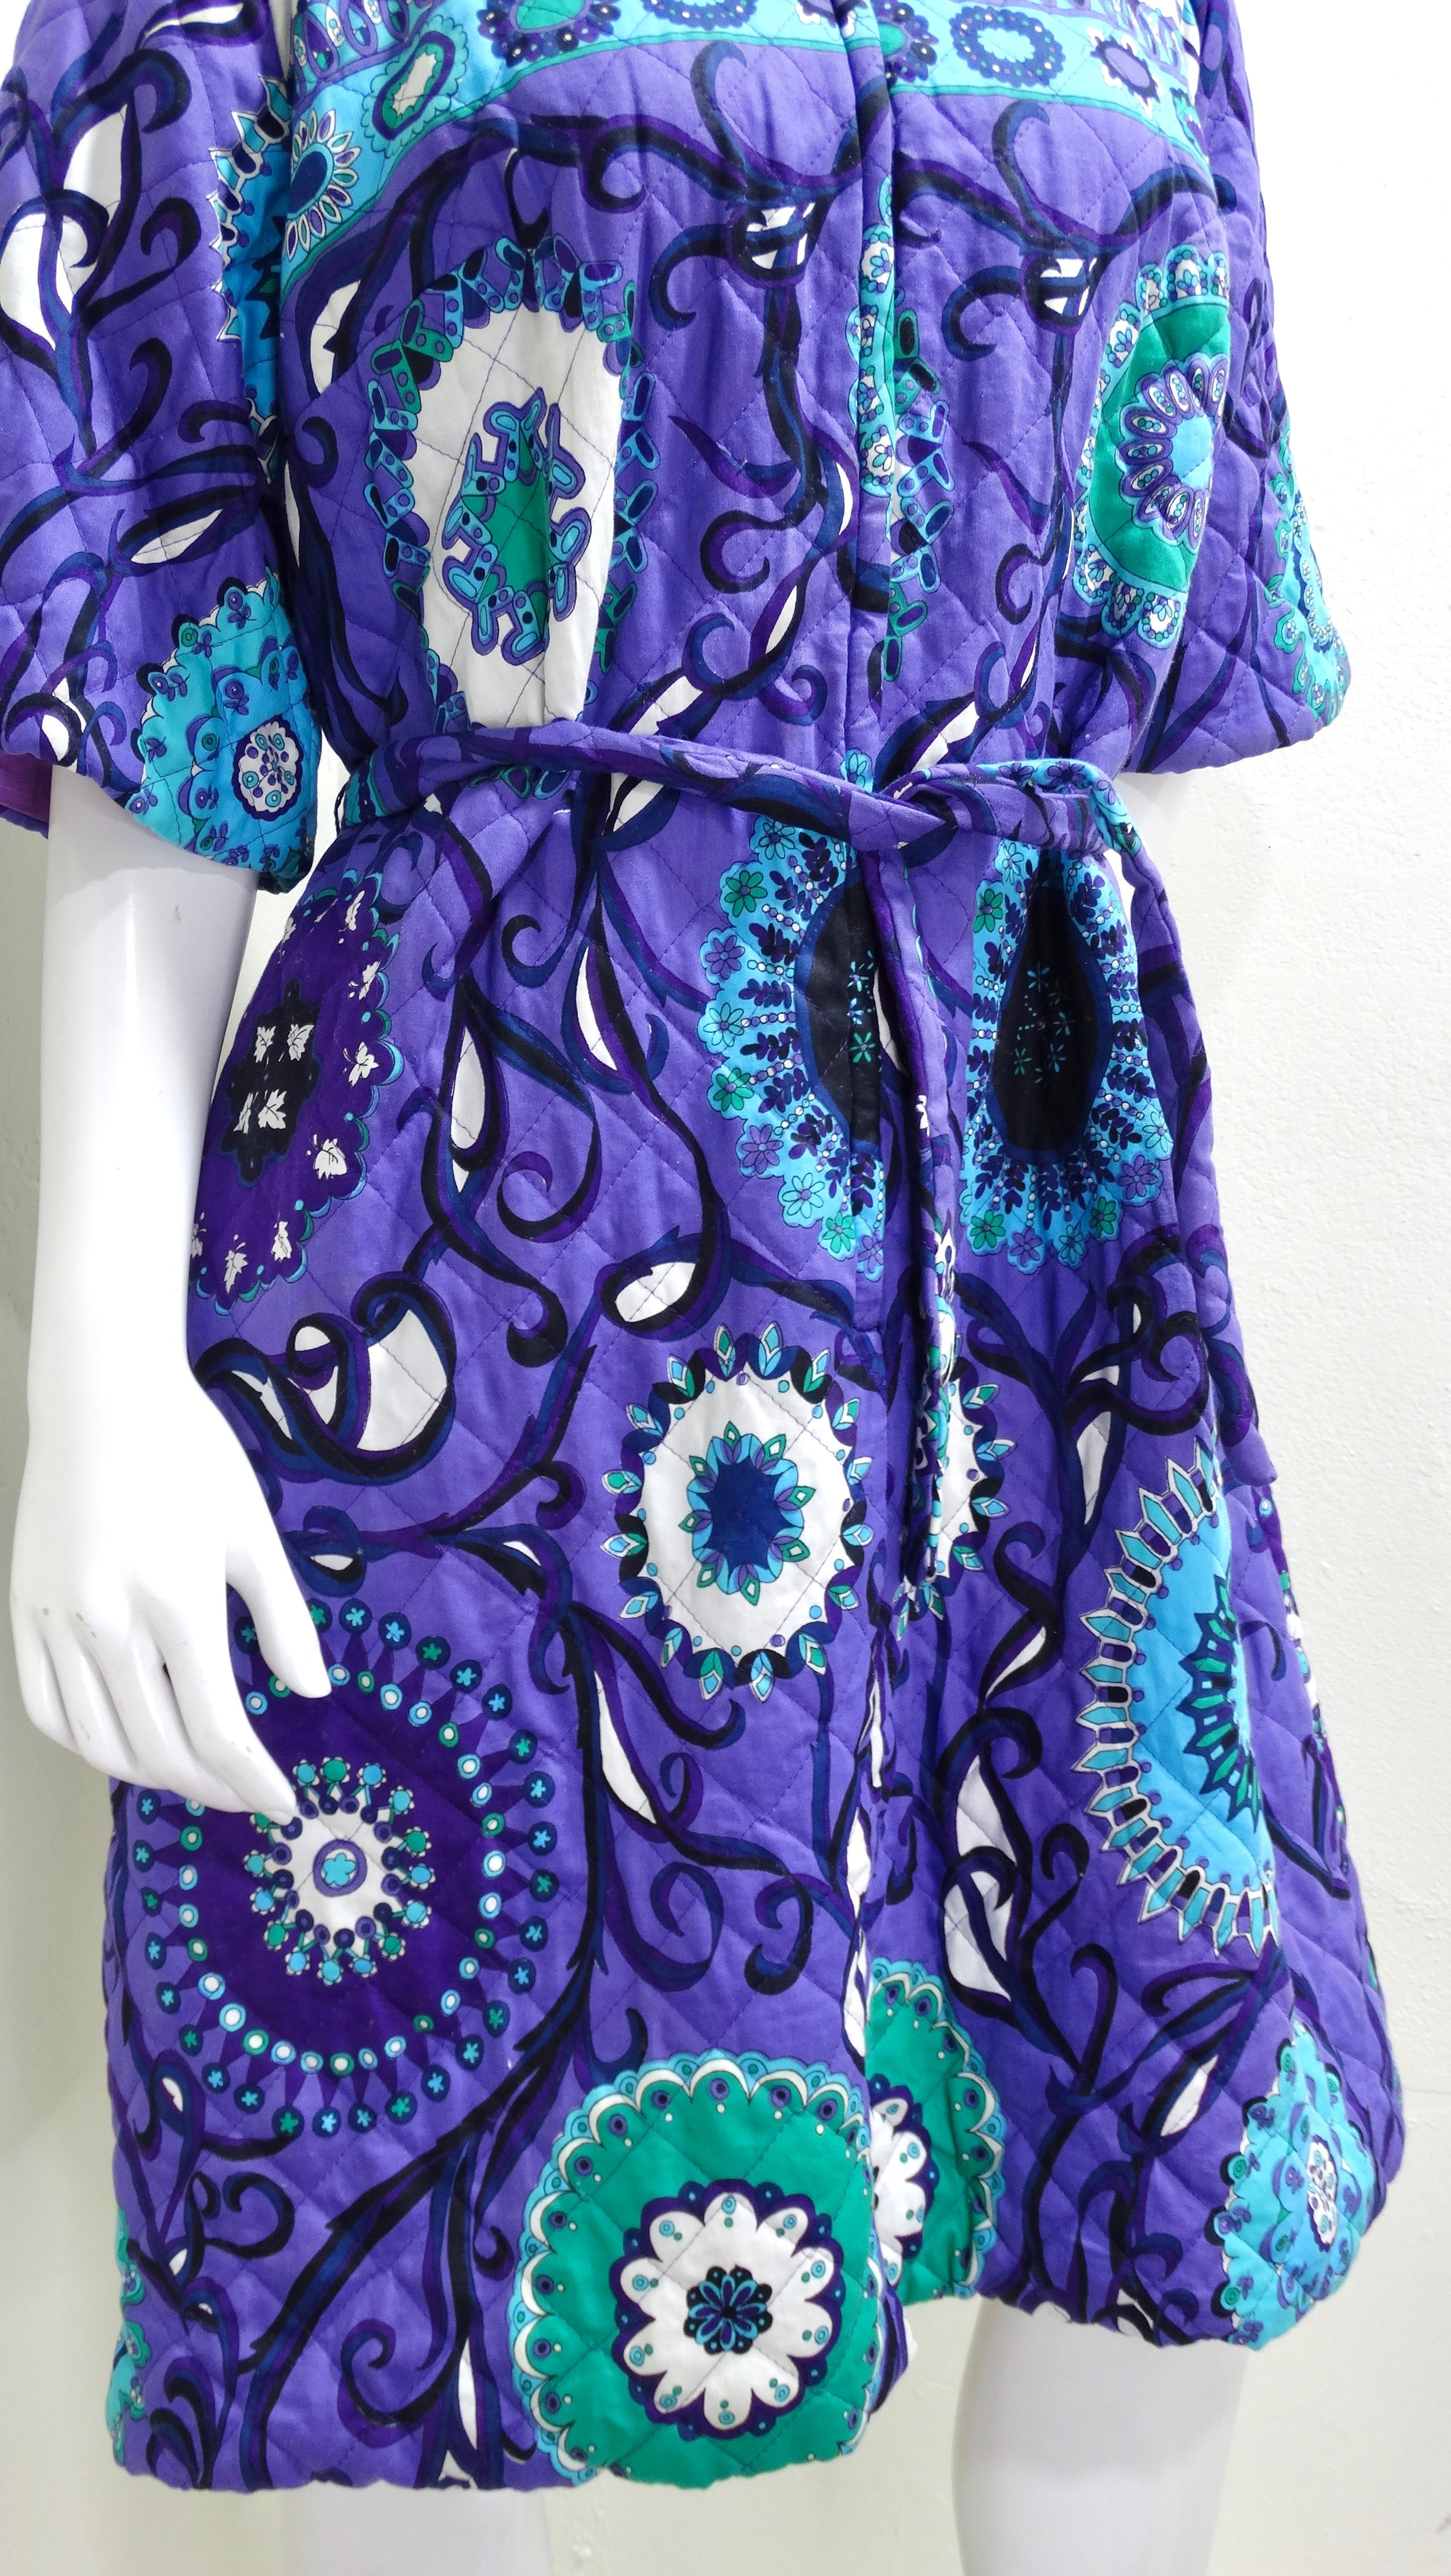 Emilio Pucci 1960's Cotton Quilted Dress In Excellent Condition For Sale In Scottsdale, AZ